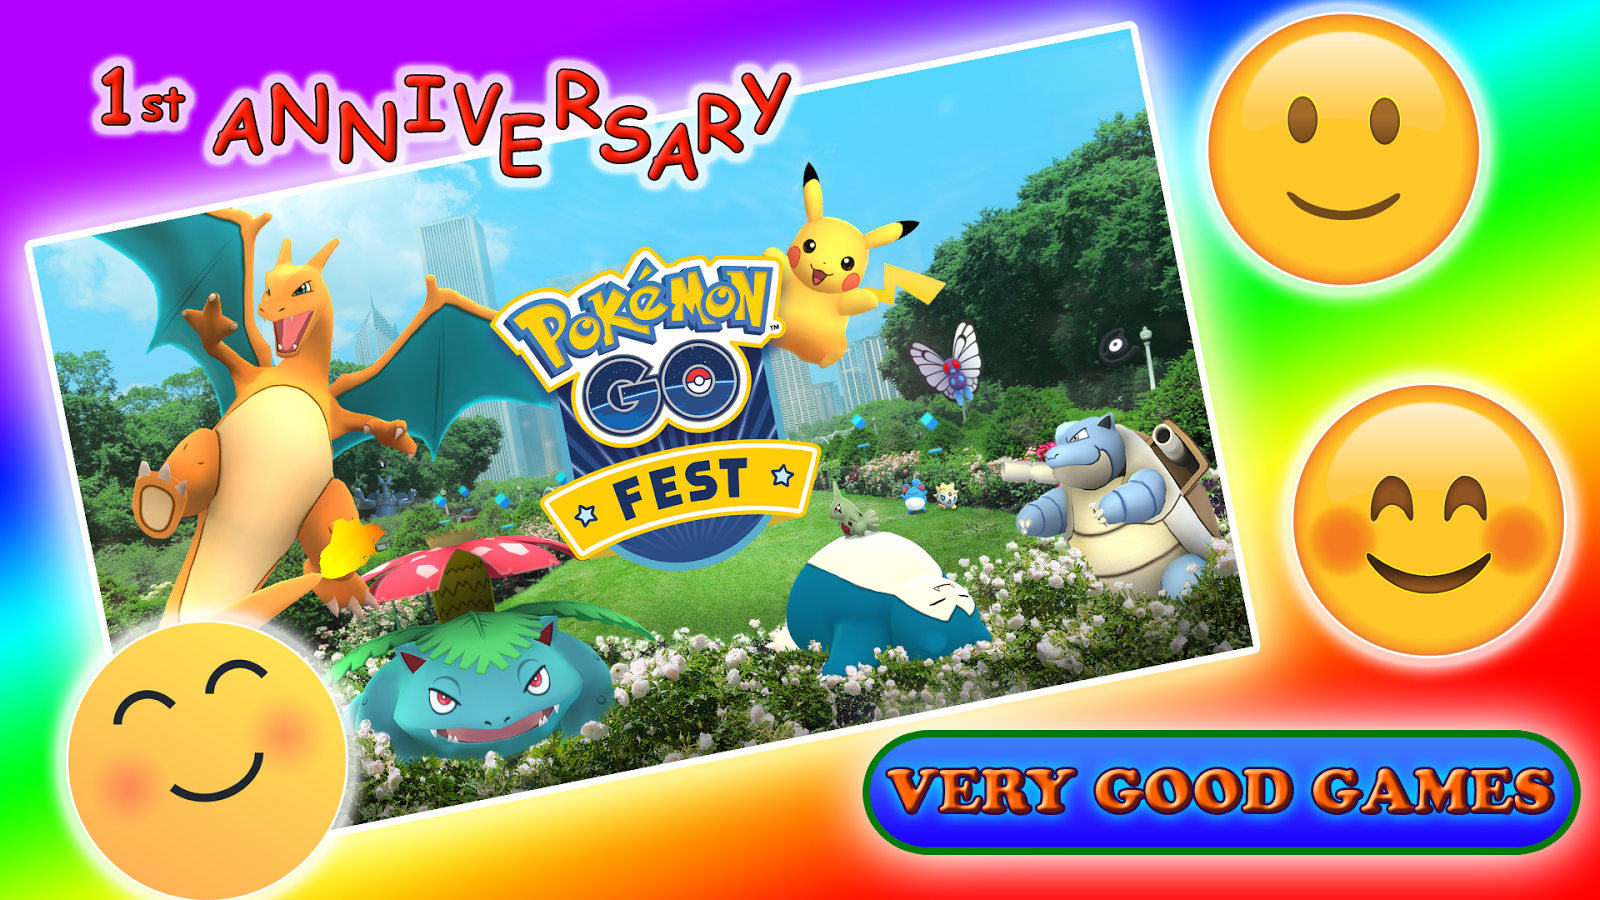 A banner for Pokemon Go Fest - and event for First Anniversary of the Pokemon Go game